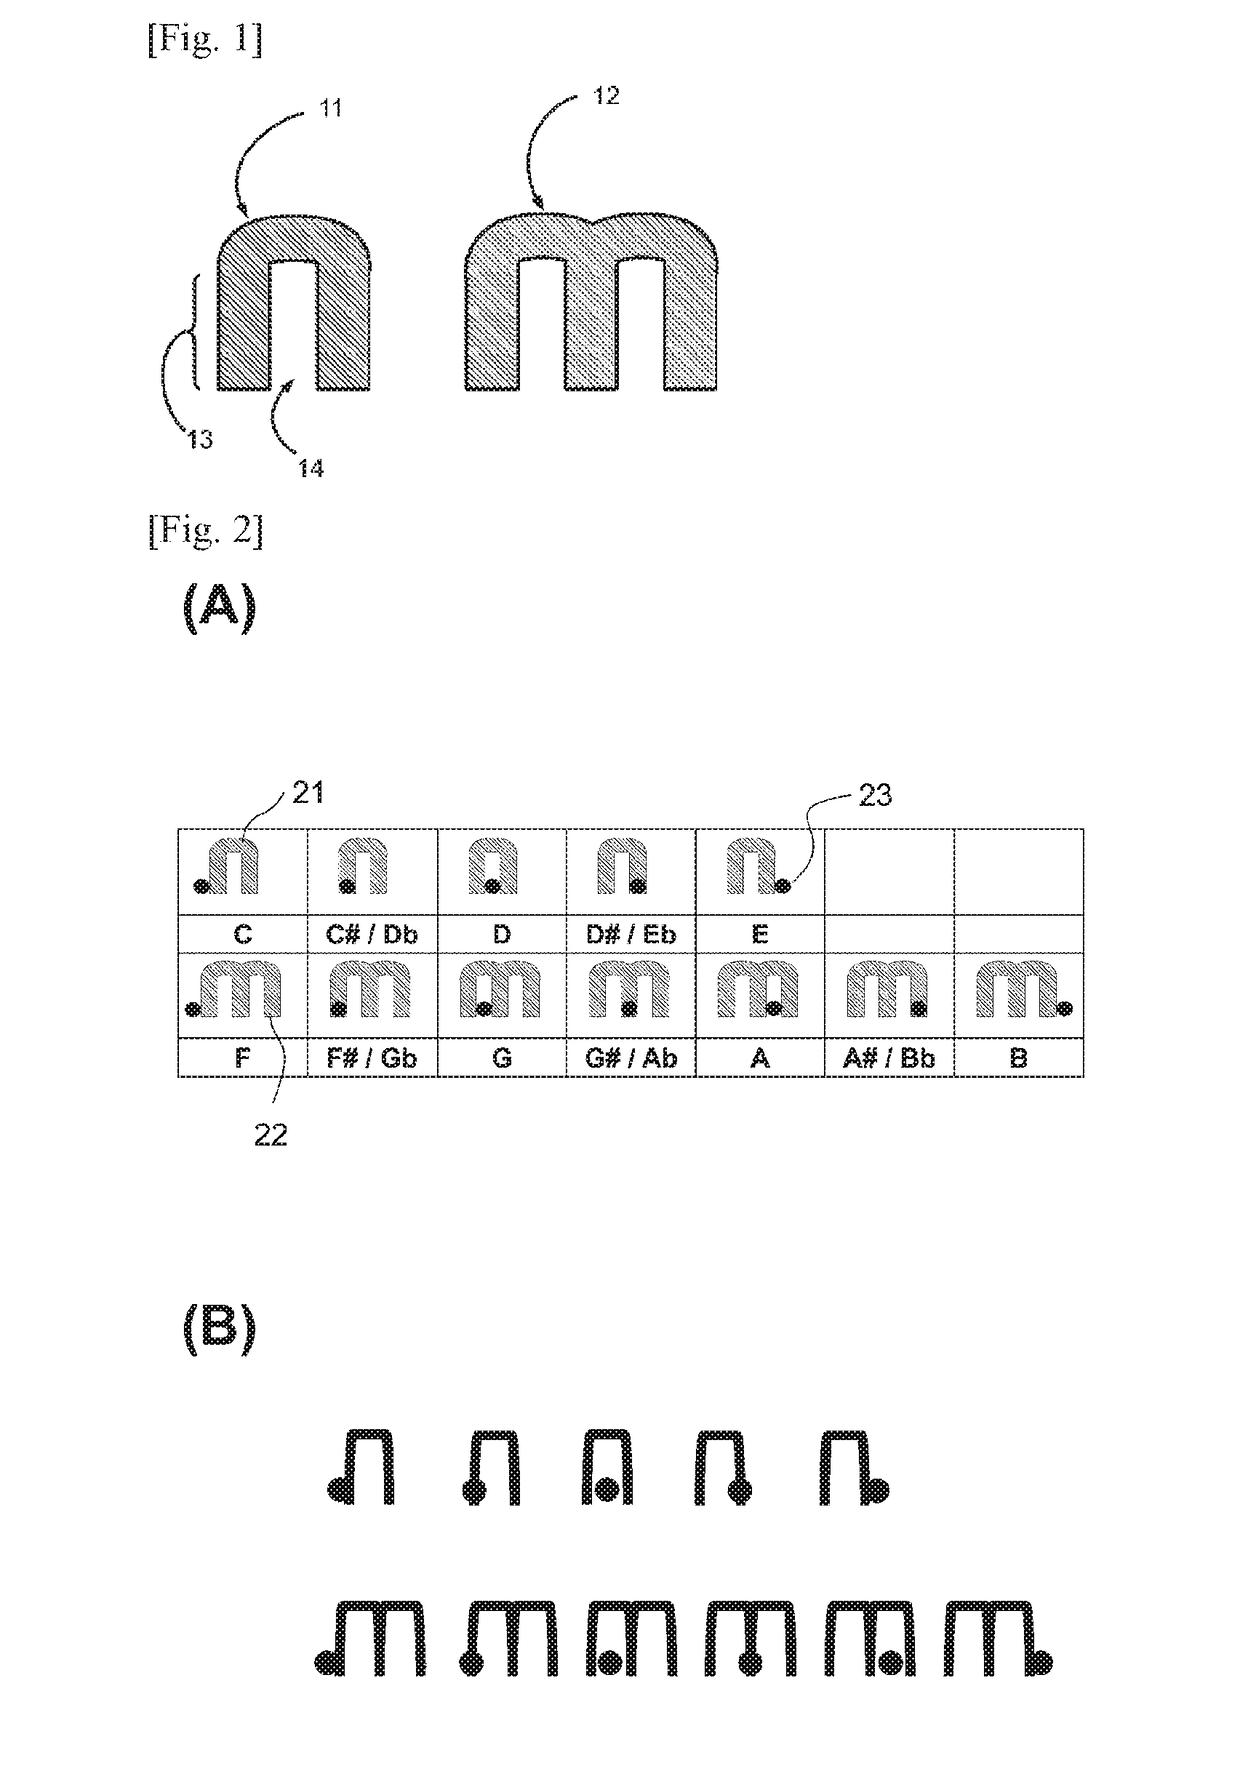 Display device for practice of keyboard instrument diagramed with black keys as markers